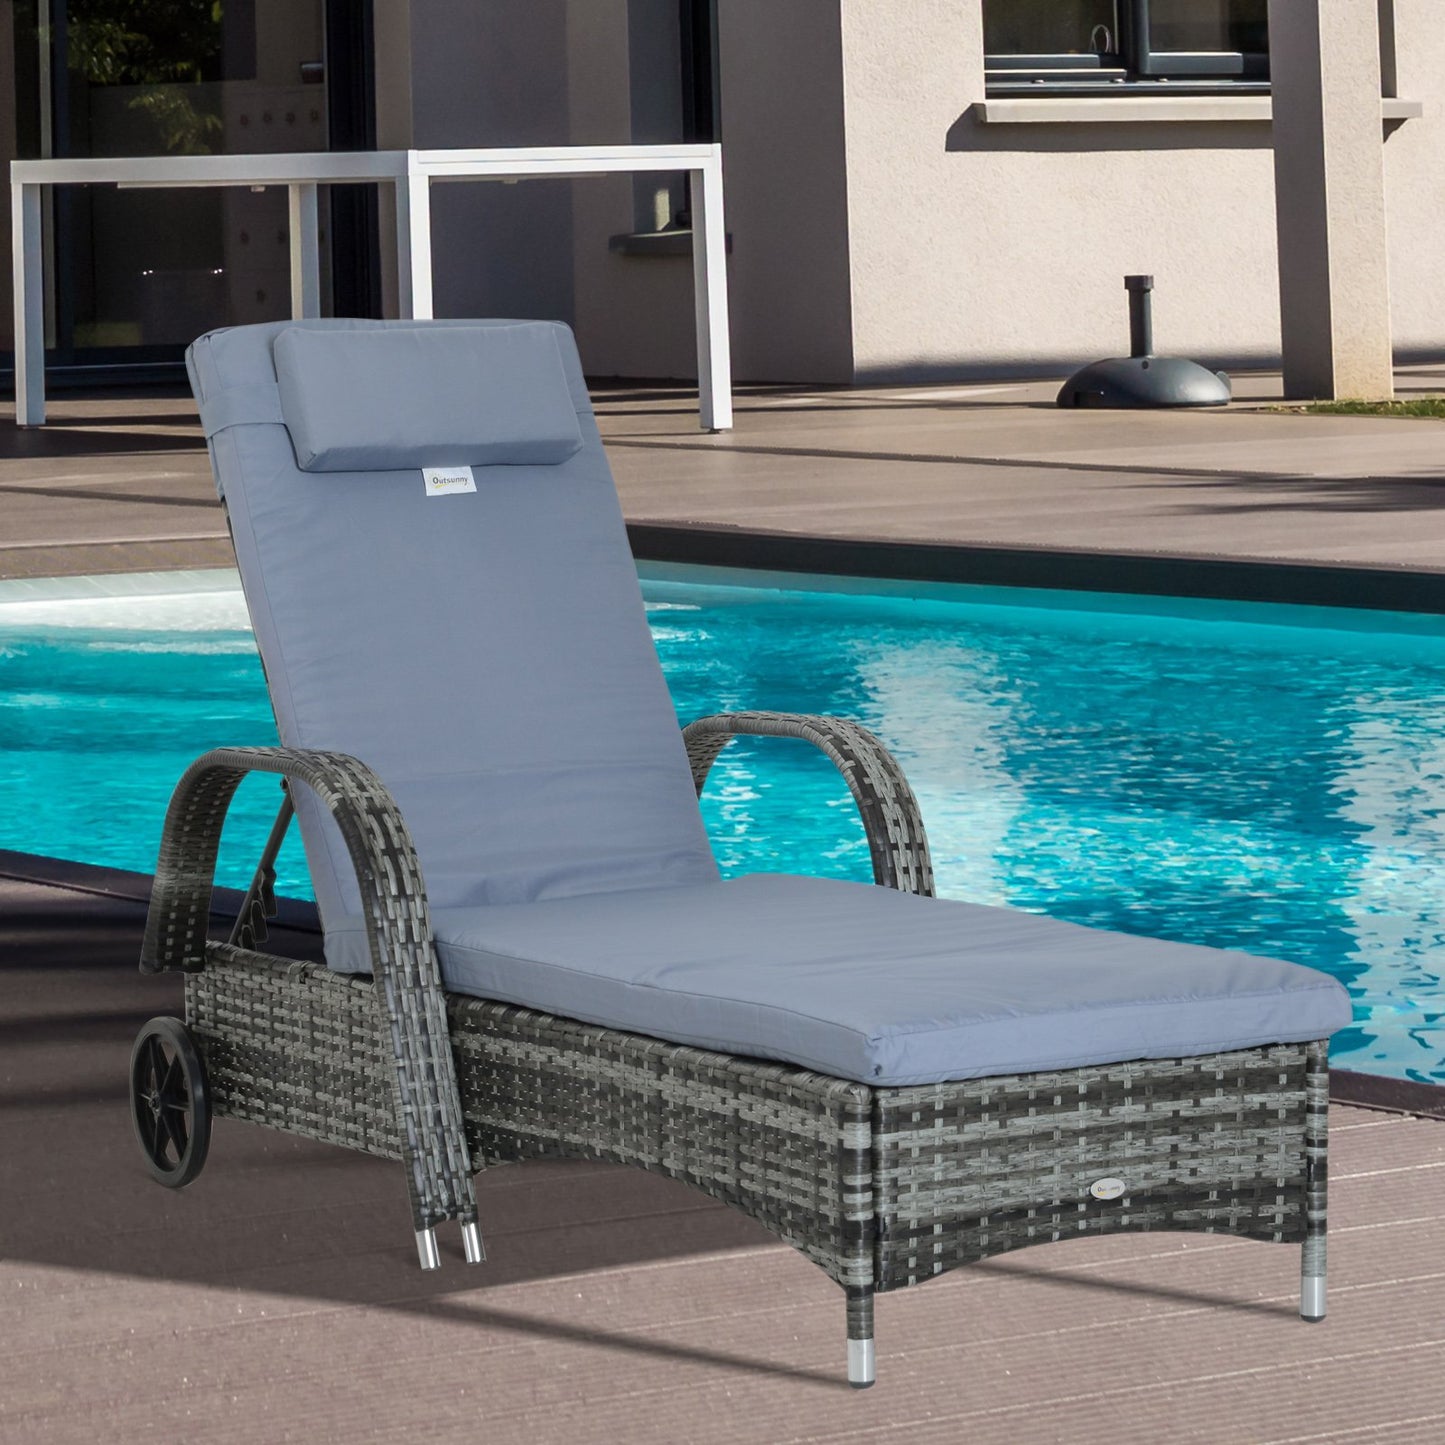 Outsunny Adjustable Rattan Sun Lounger W/ Cushion, 200Lx73Wx56-103H cm-Grey